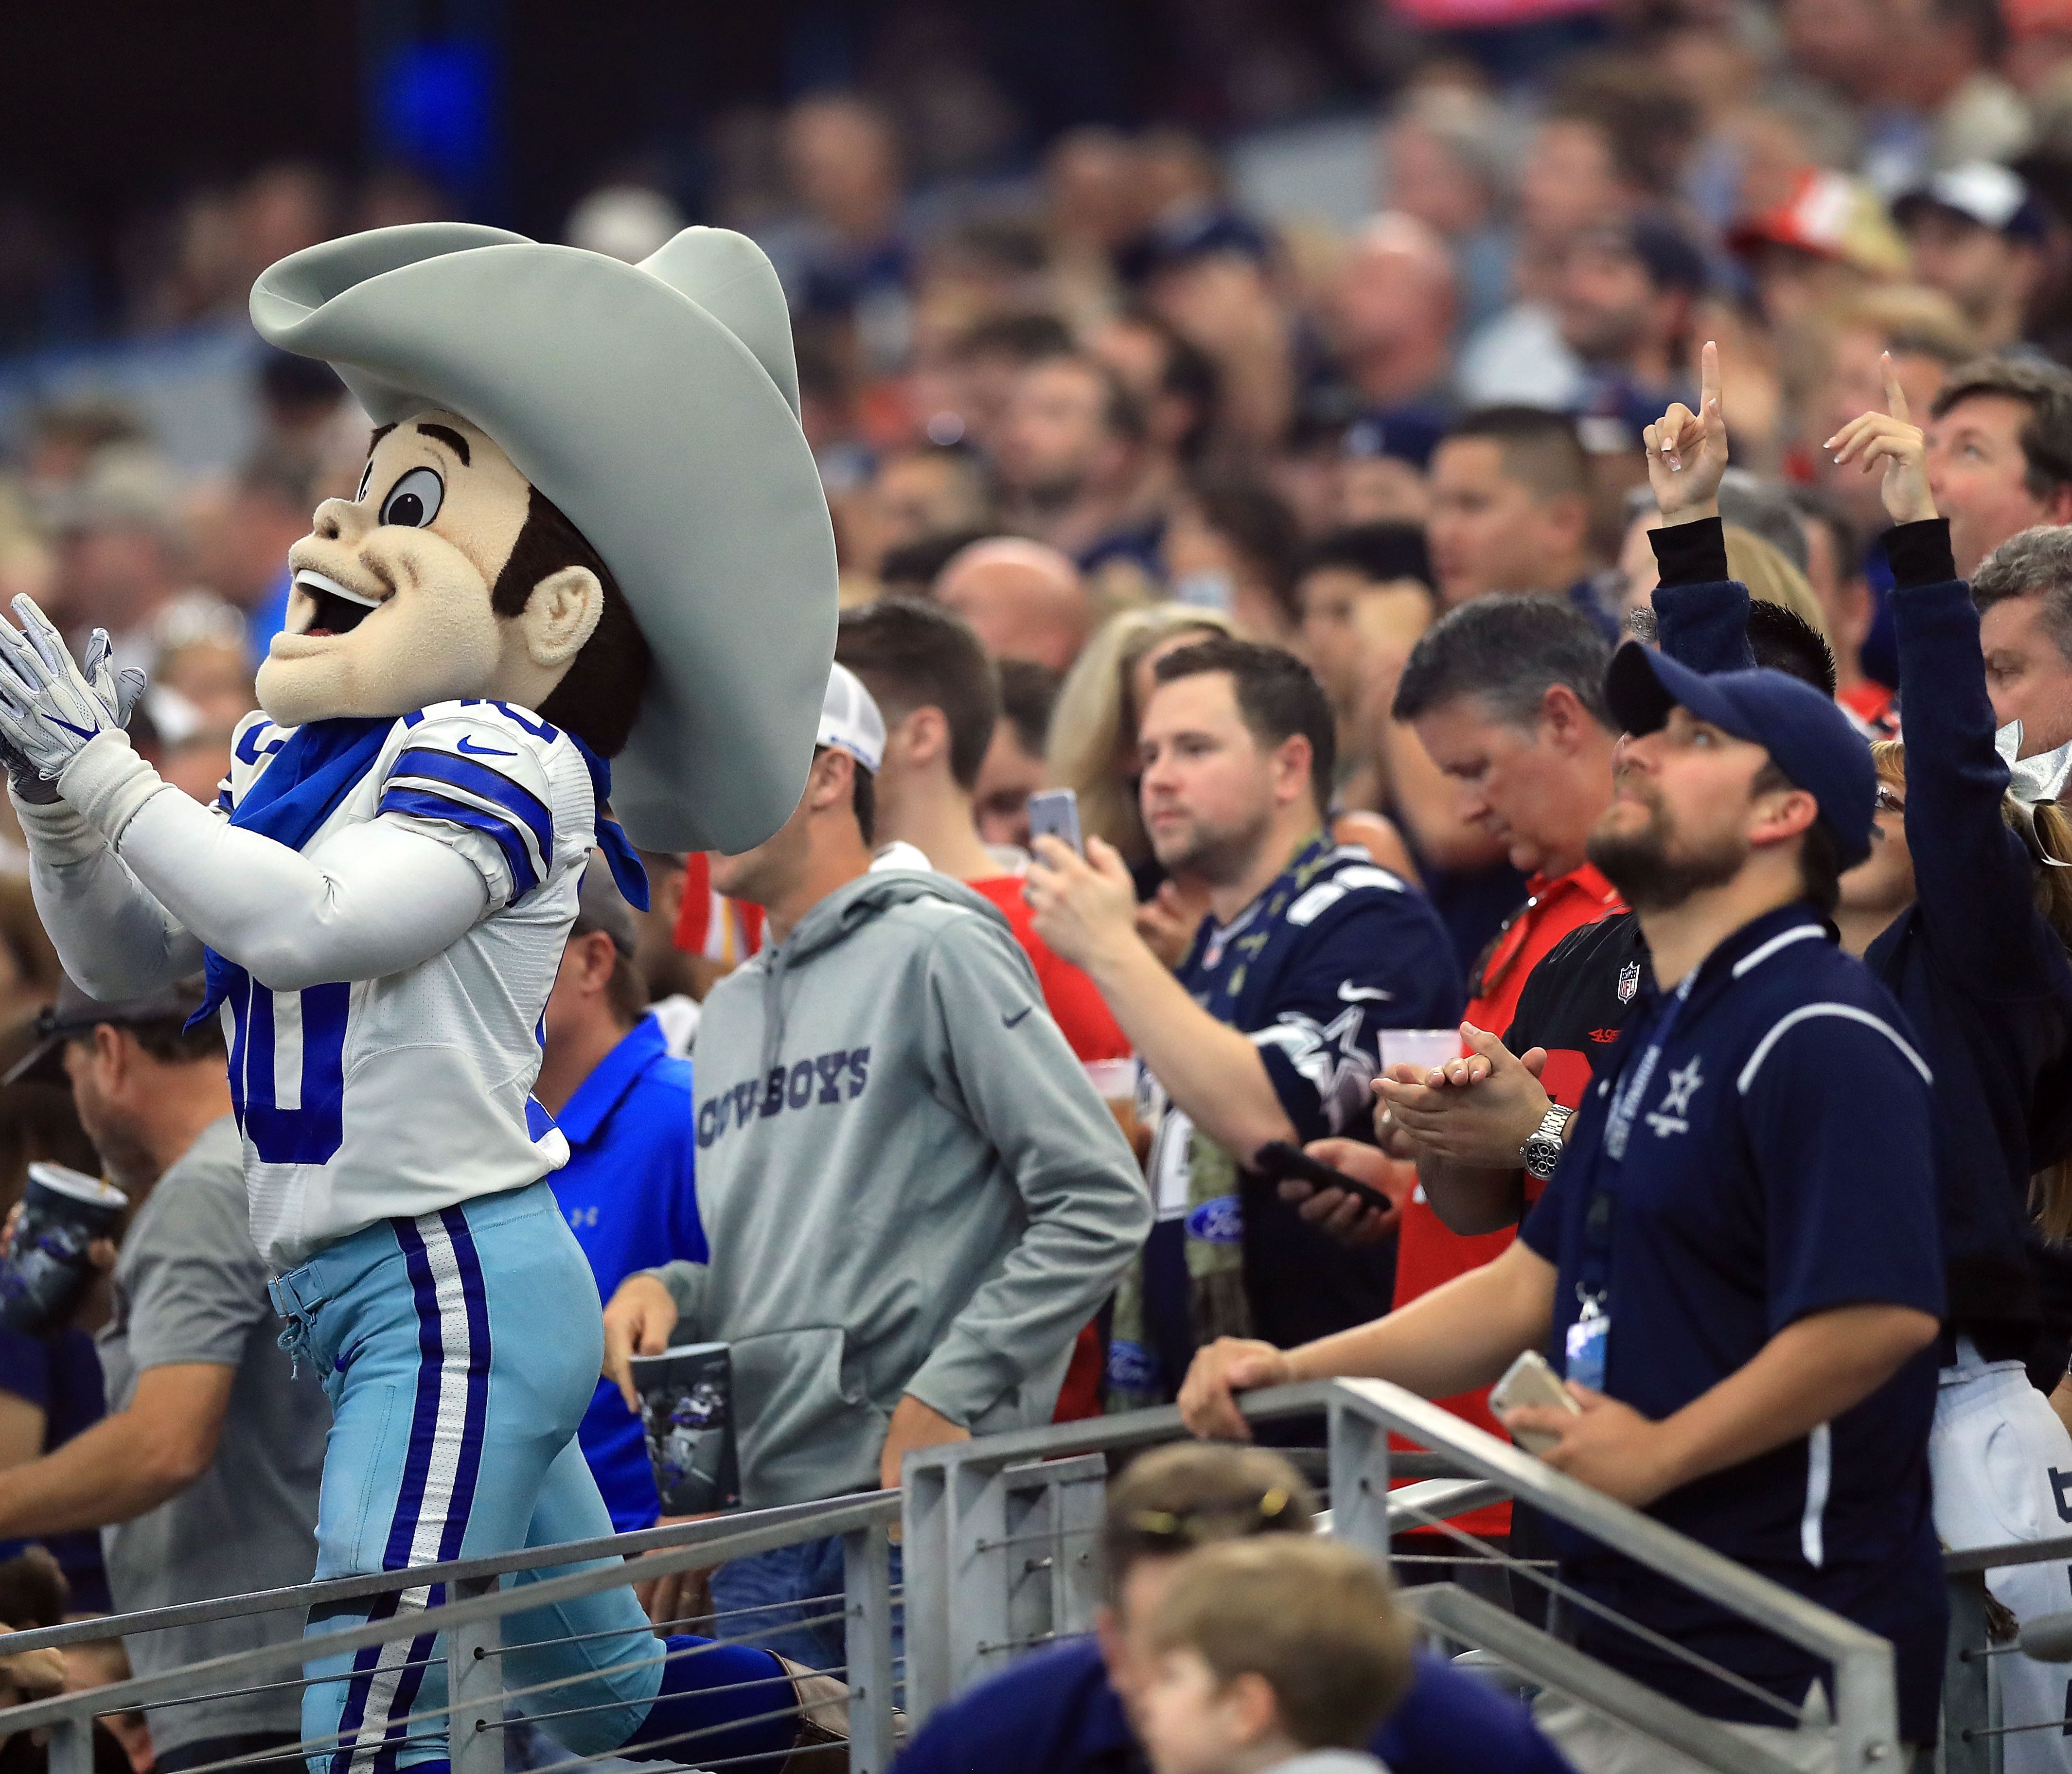 ARLINGTON, TX - NOVEMBER 05: Rowdy, the mascot of the Dallas Cowboys, cheers with fans during a football game against the Kansas City Chiefs at AT&T Stadium on November 5, 2017 in Arlington, Texas. (Photo by Ronald Martinez/Getty Images) ORG XMIT